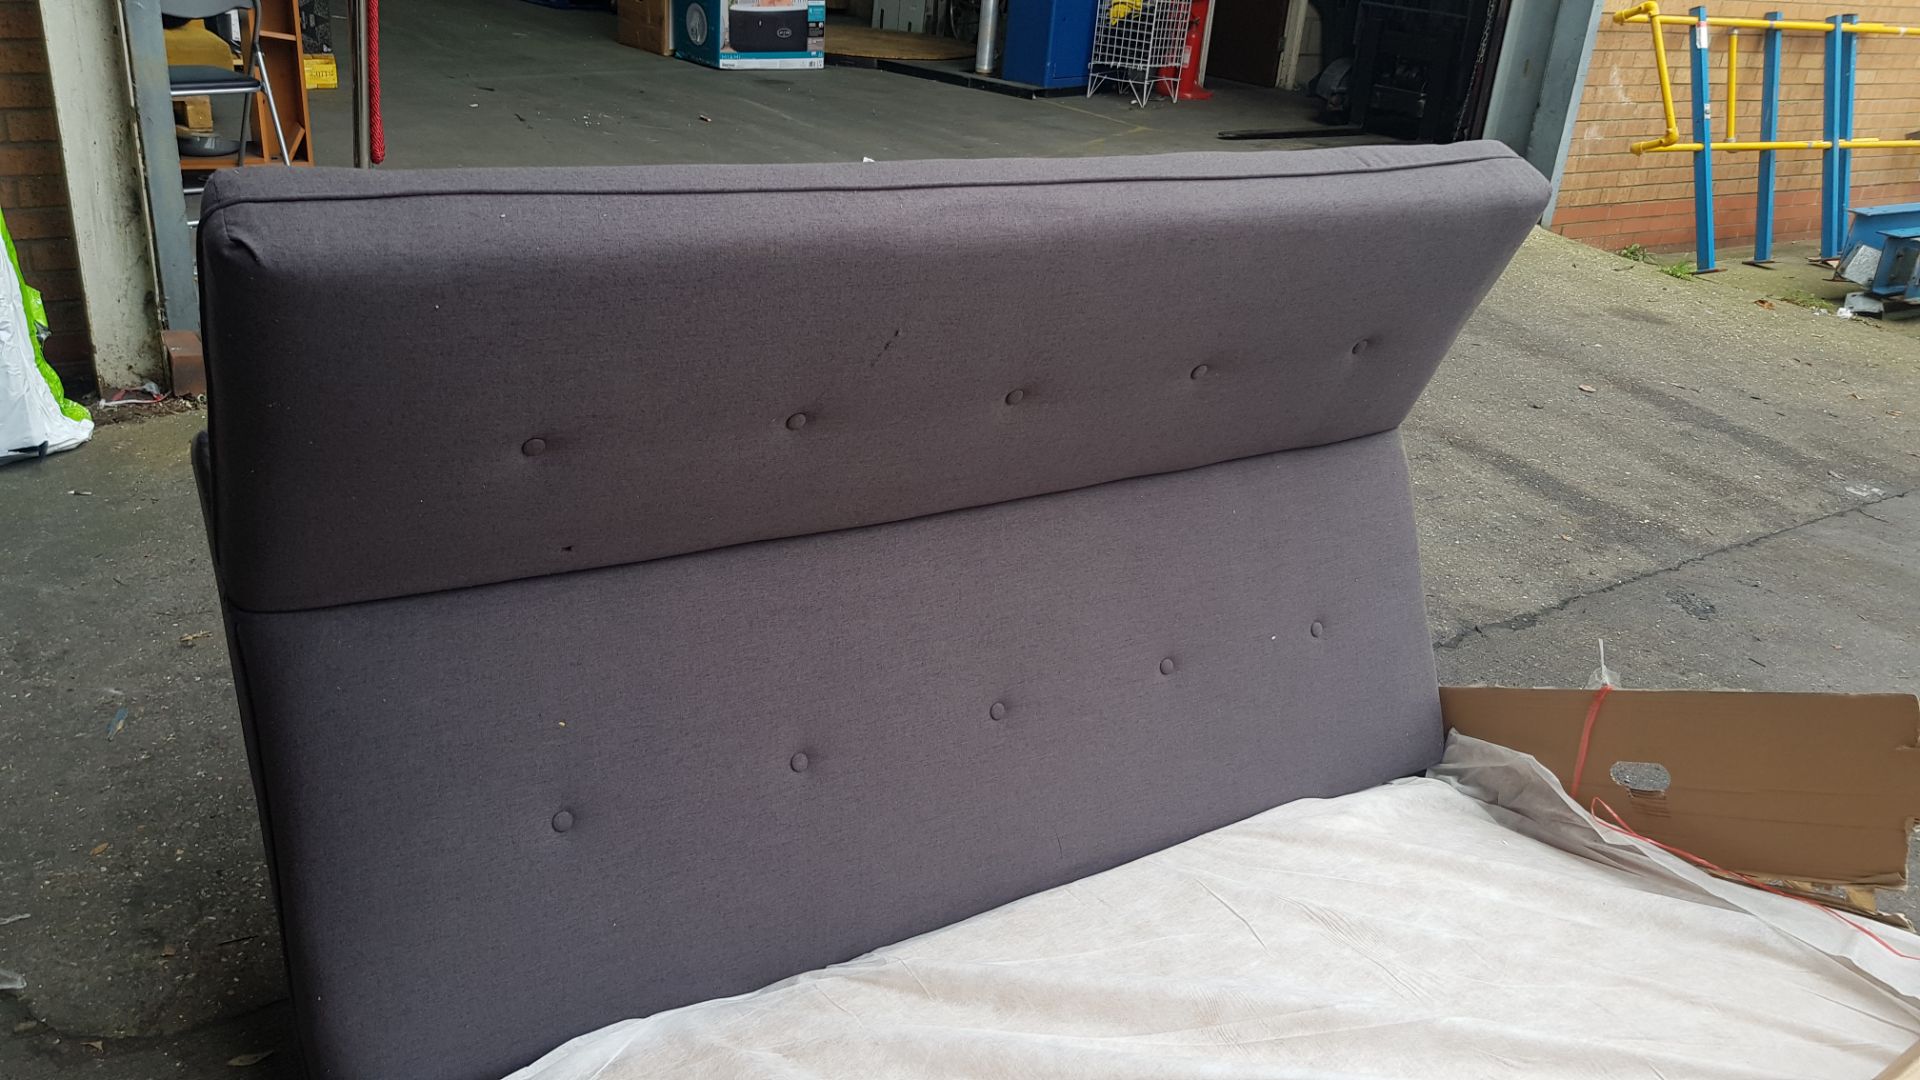 (P4) 1x Sindy Sofa Bed With Storage Charcoal RRP £300. (Sofa: H85x W200x D84cm). (Bed: H44x W200x D - Image 6 of 7